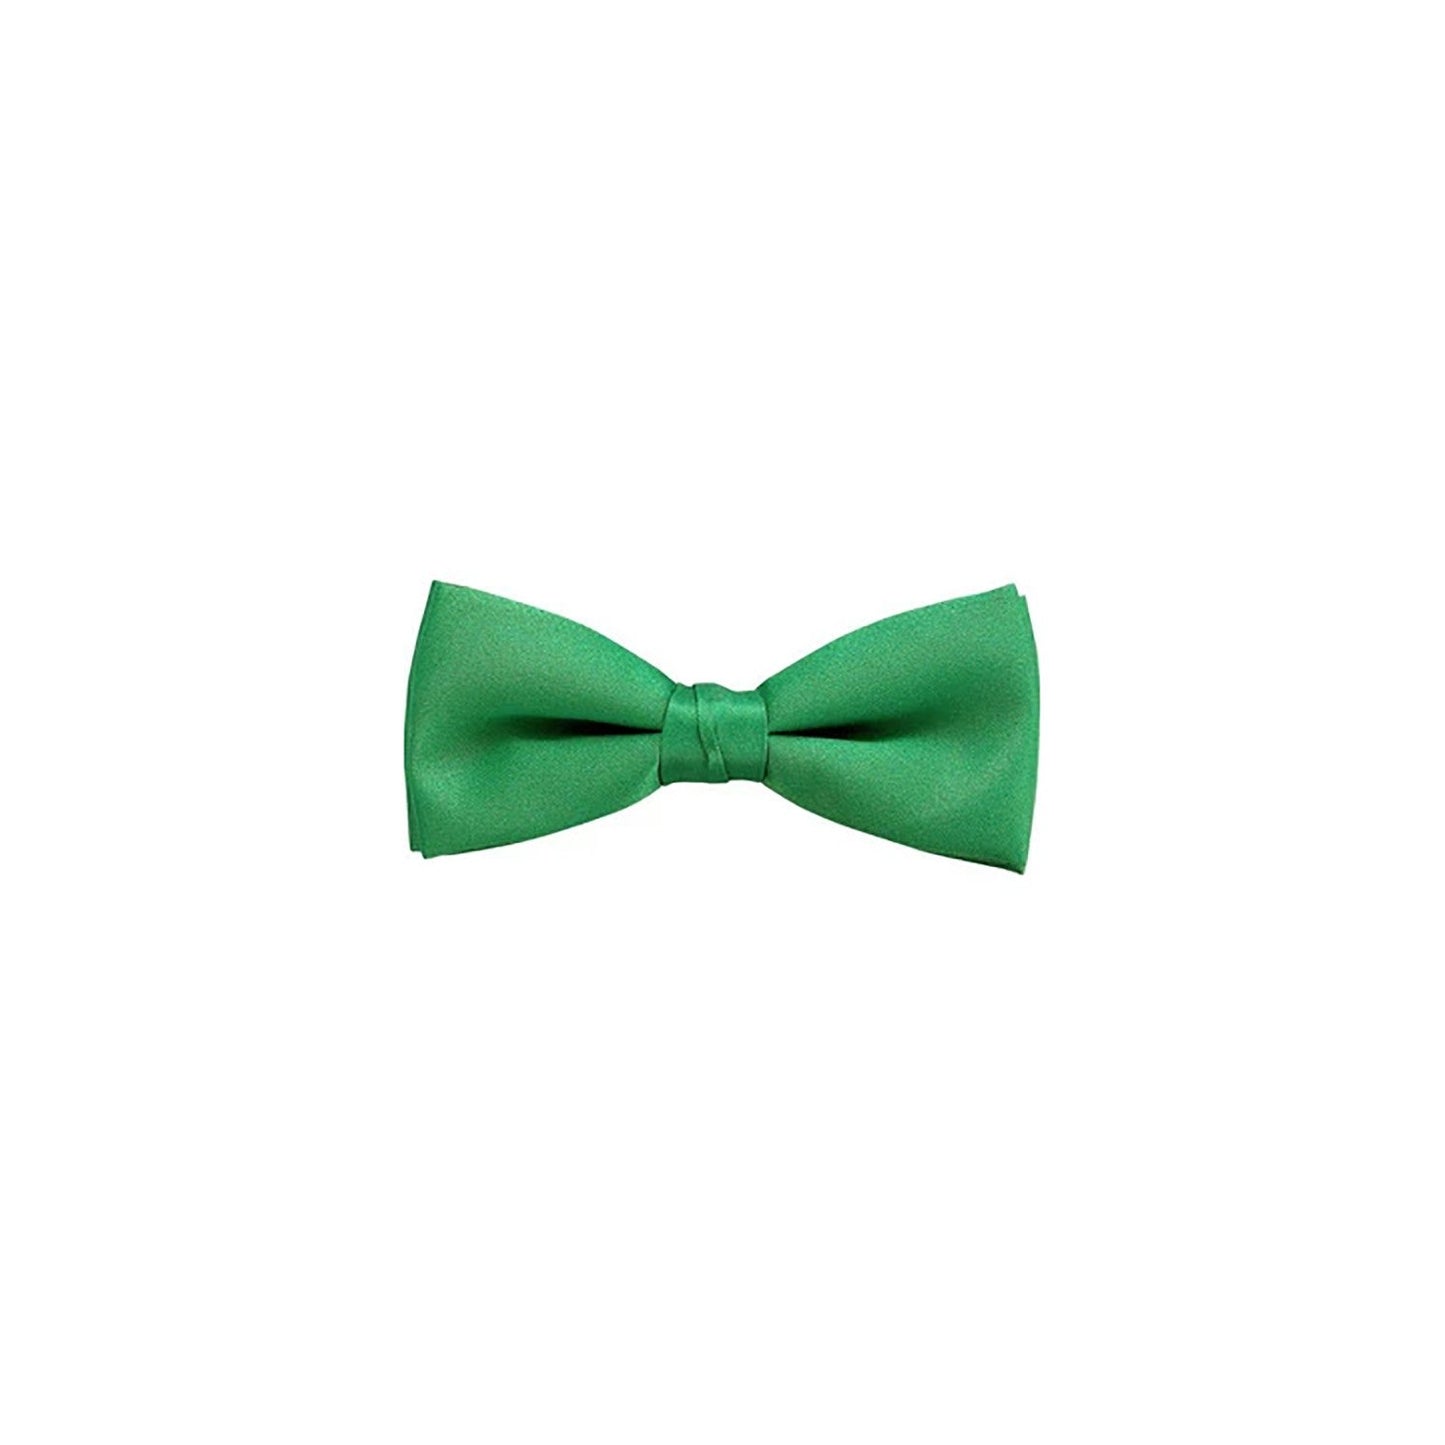 Poly/Satin Bow Tie - 6 Colors